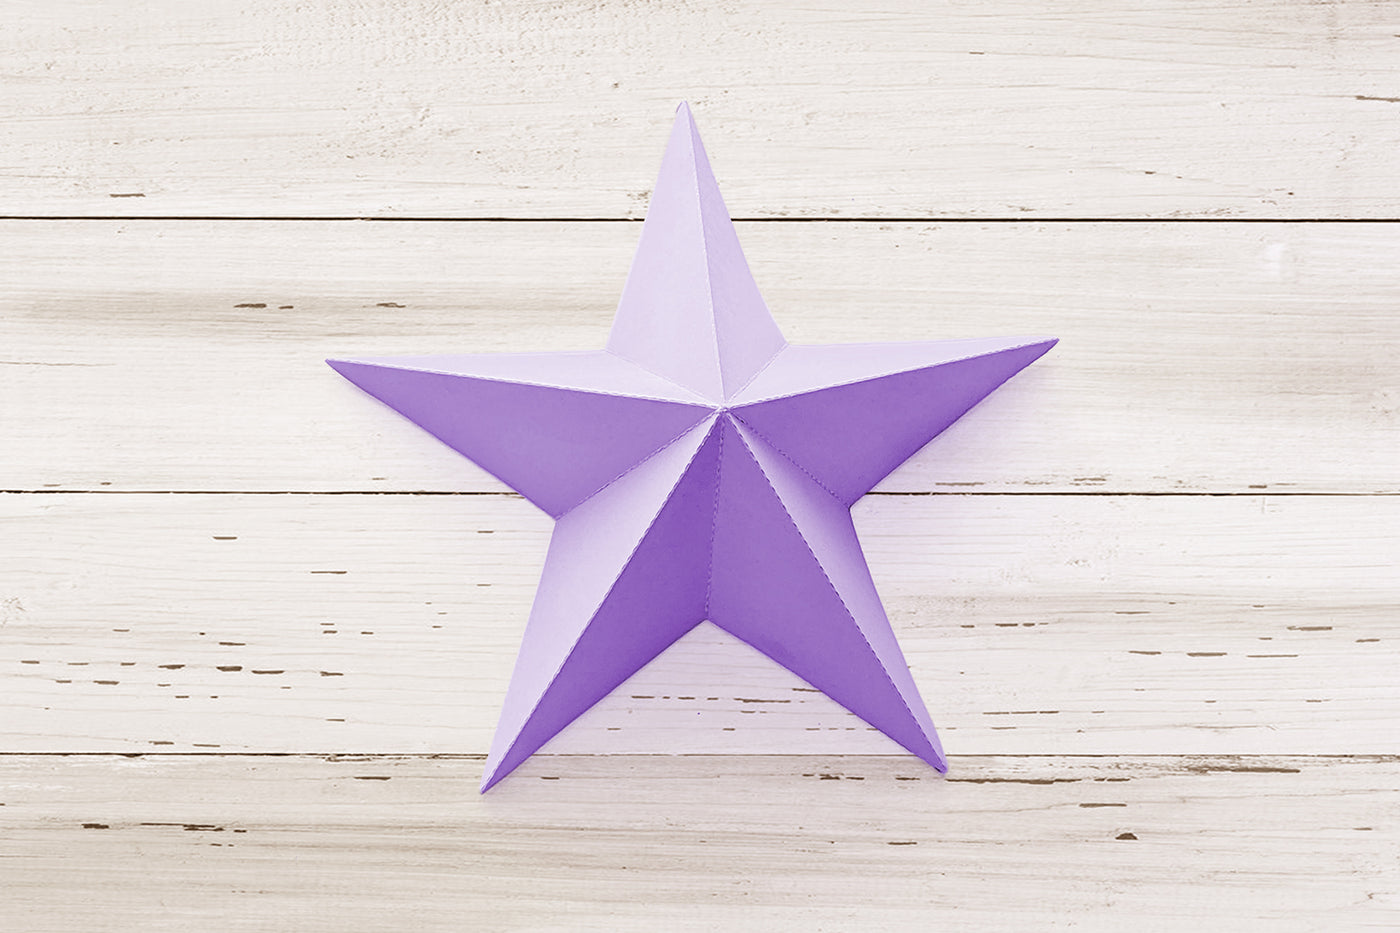 3D folded paper star with 5 points